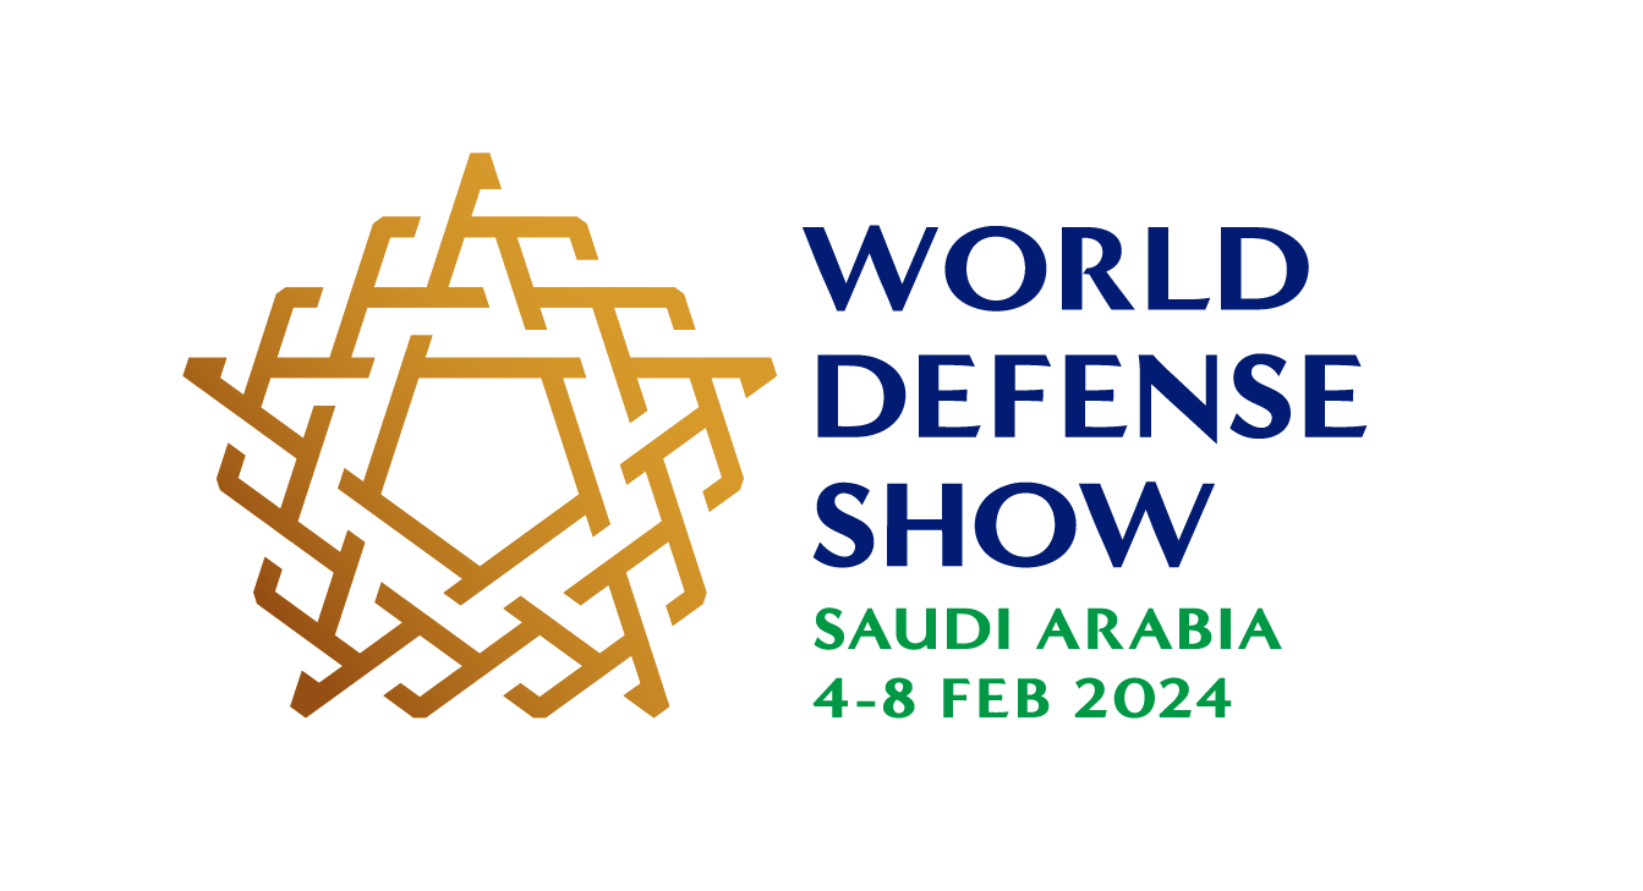 Our team will be present at the World Defense Show